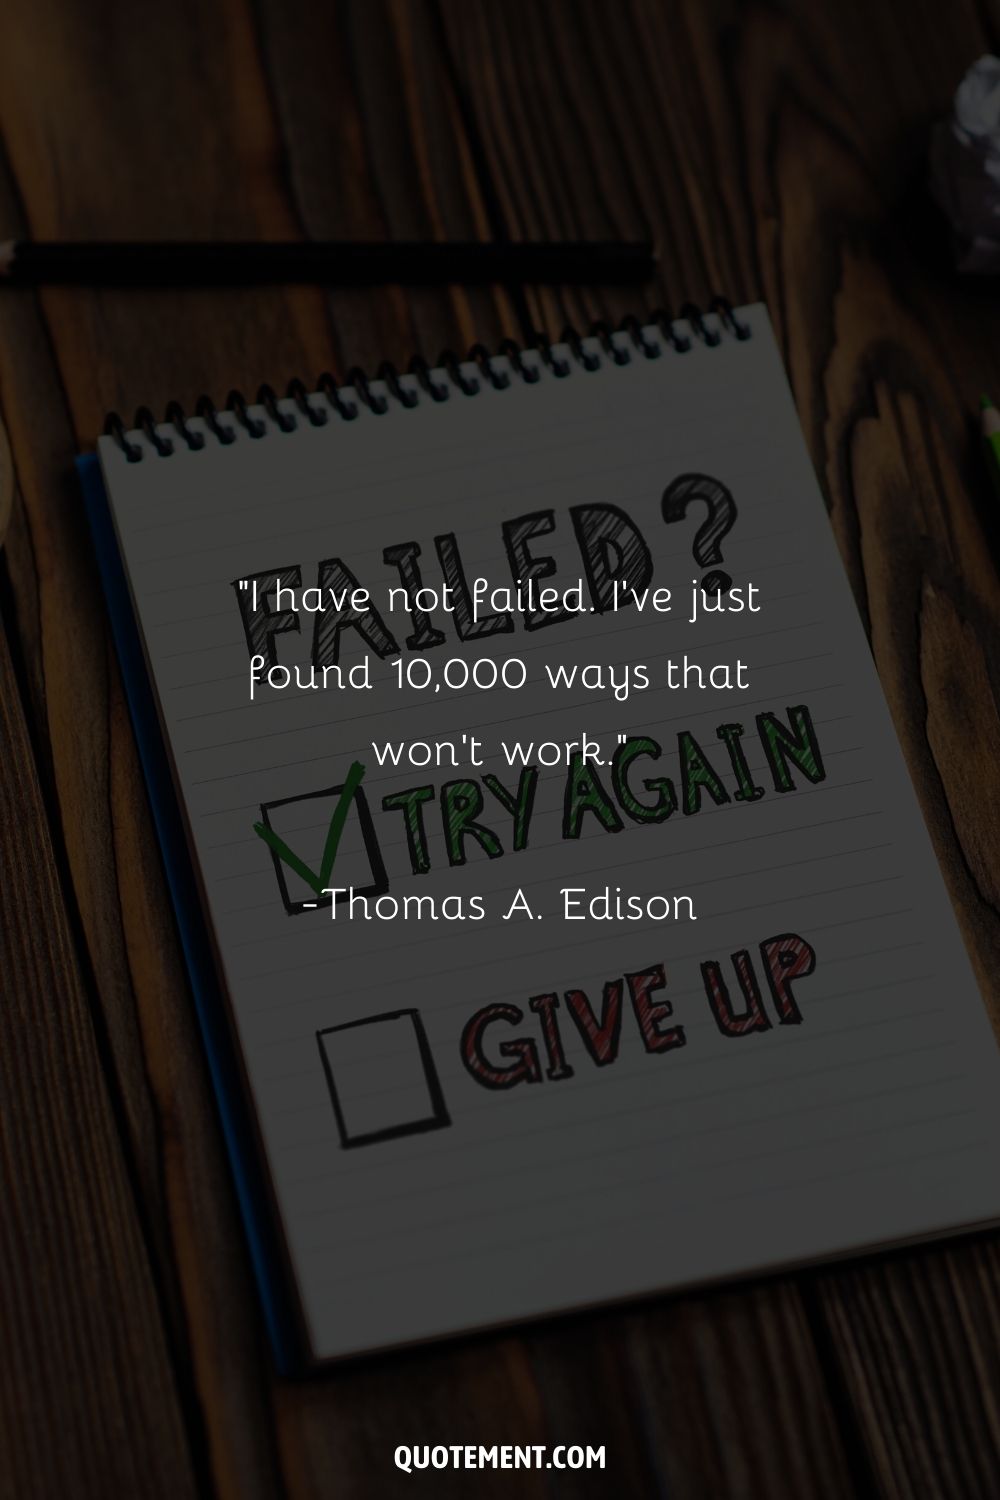 “I have not failed. I've just found 10,000 ways that won't work.” ― Thomas A. Edison